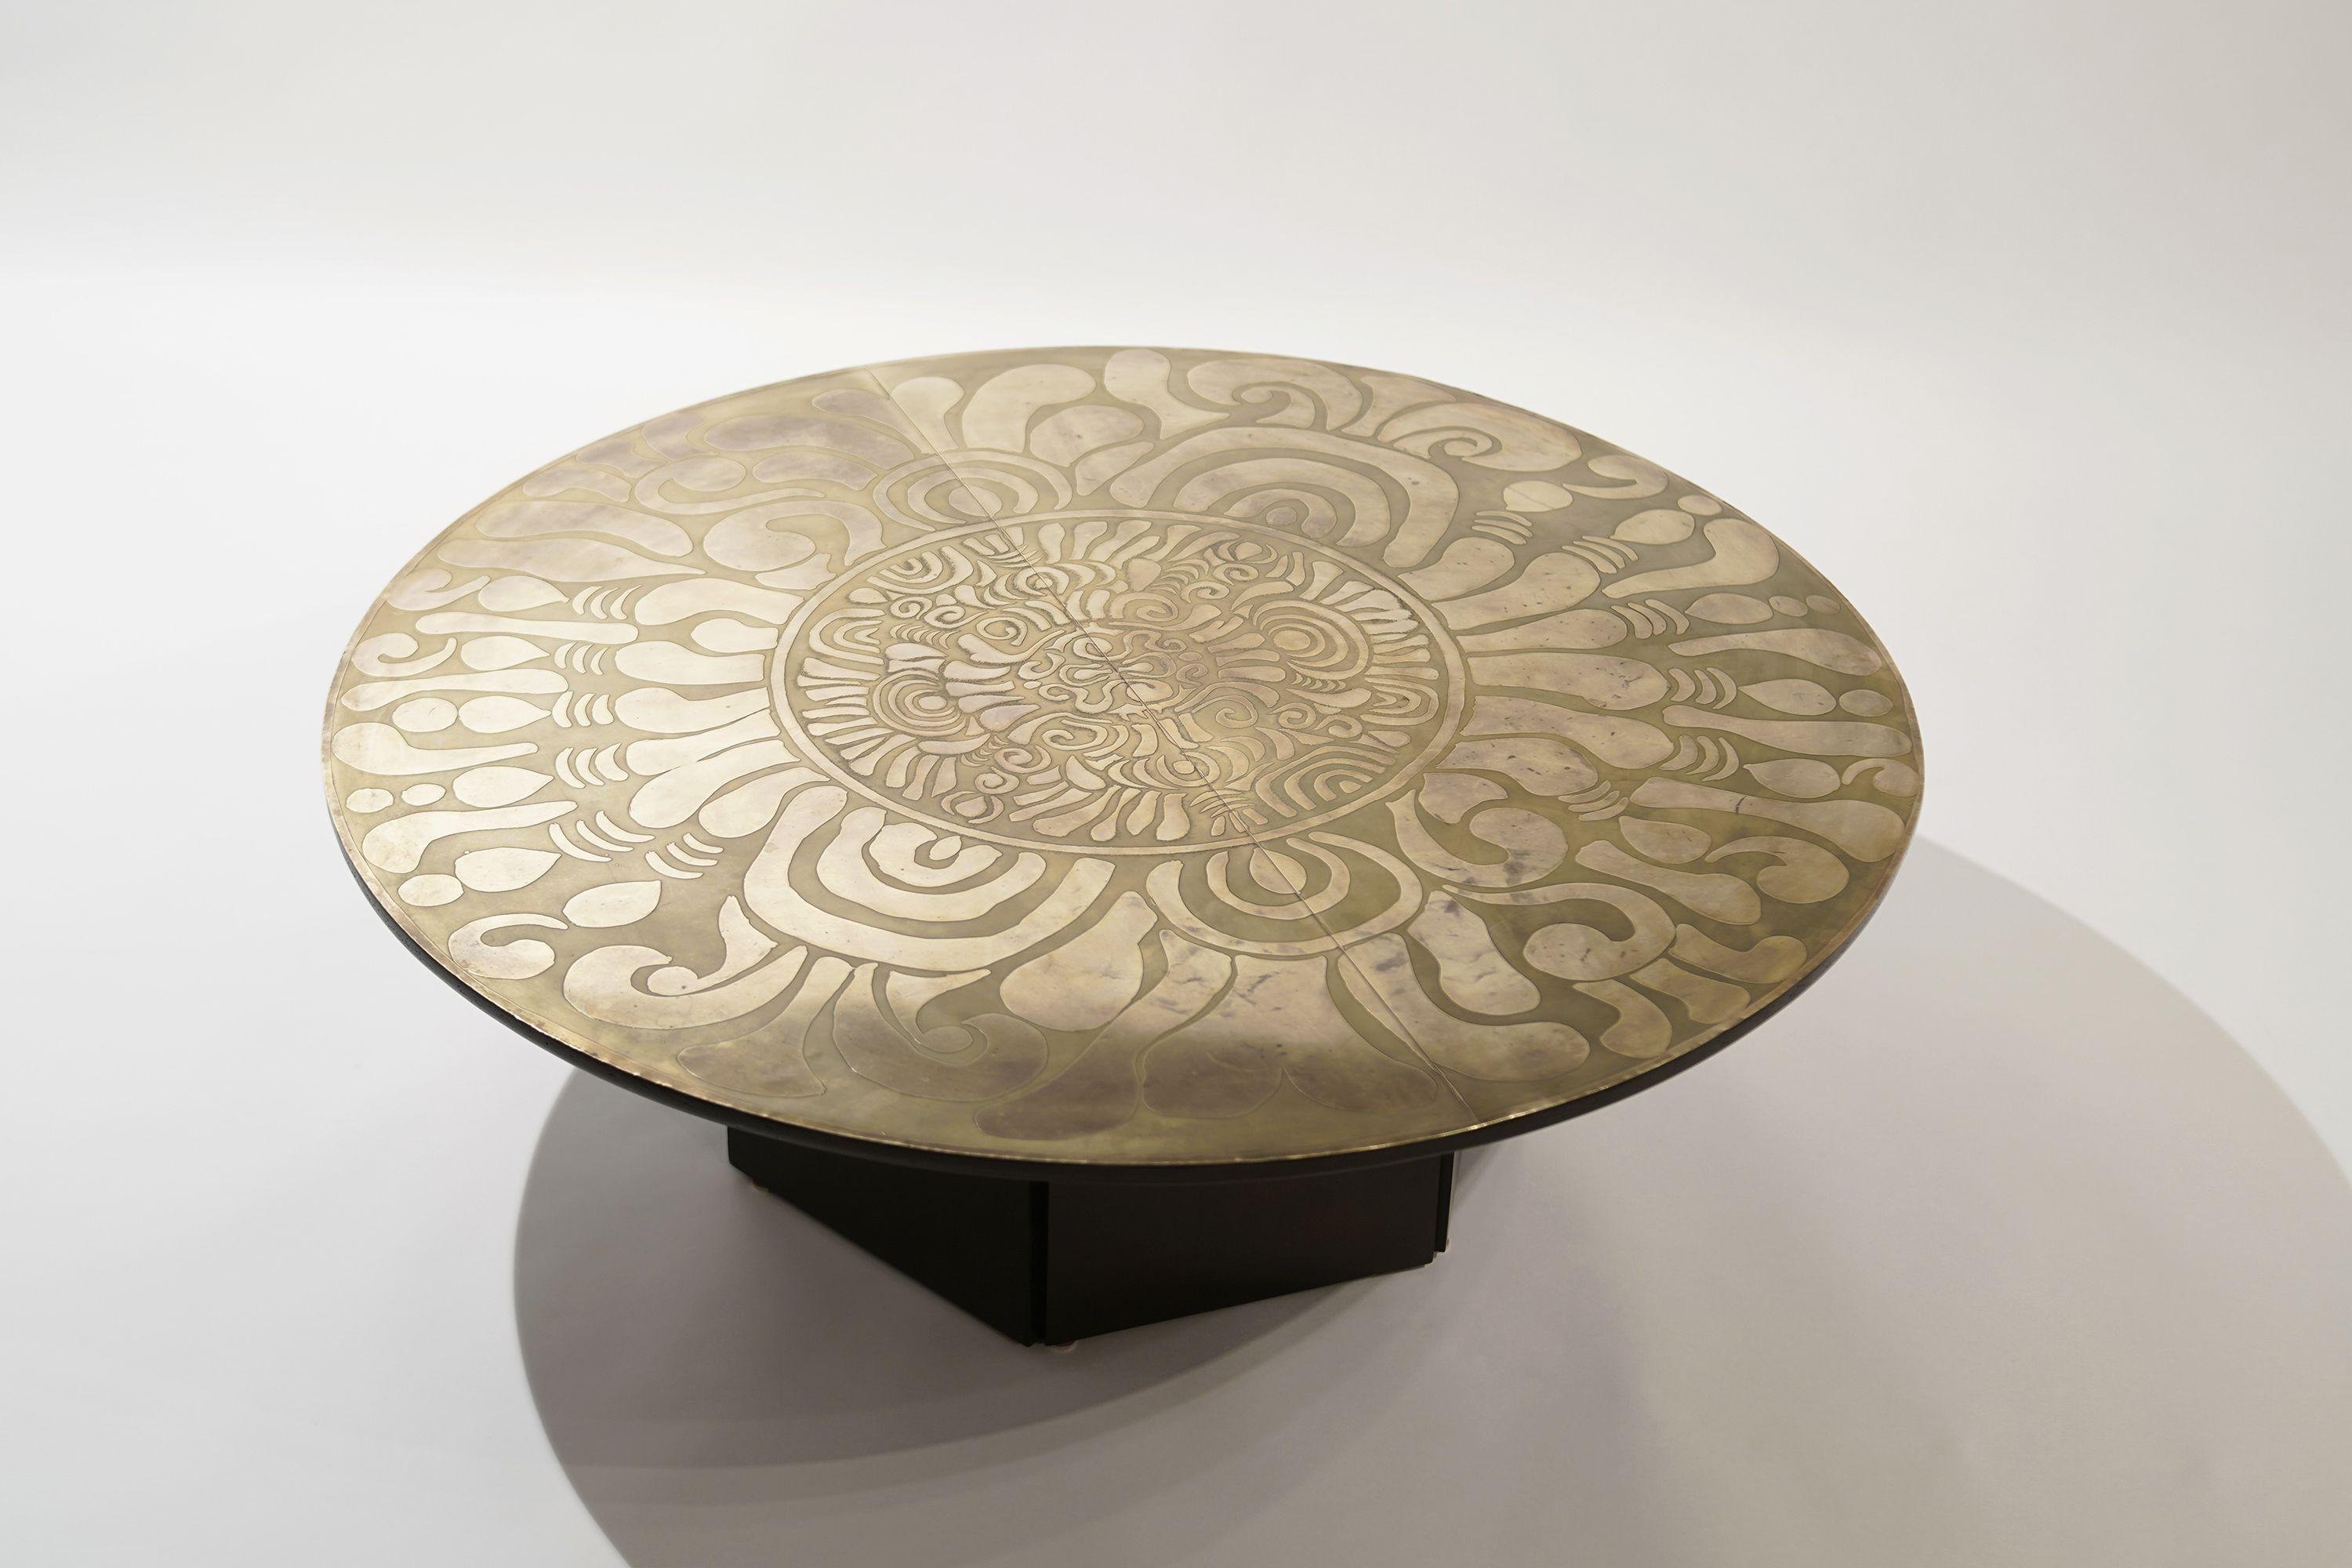 American Etched Brass Coffee Table by Enviene M. Barbara Parker, 1965